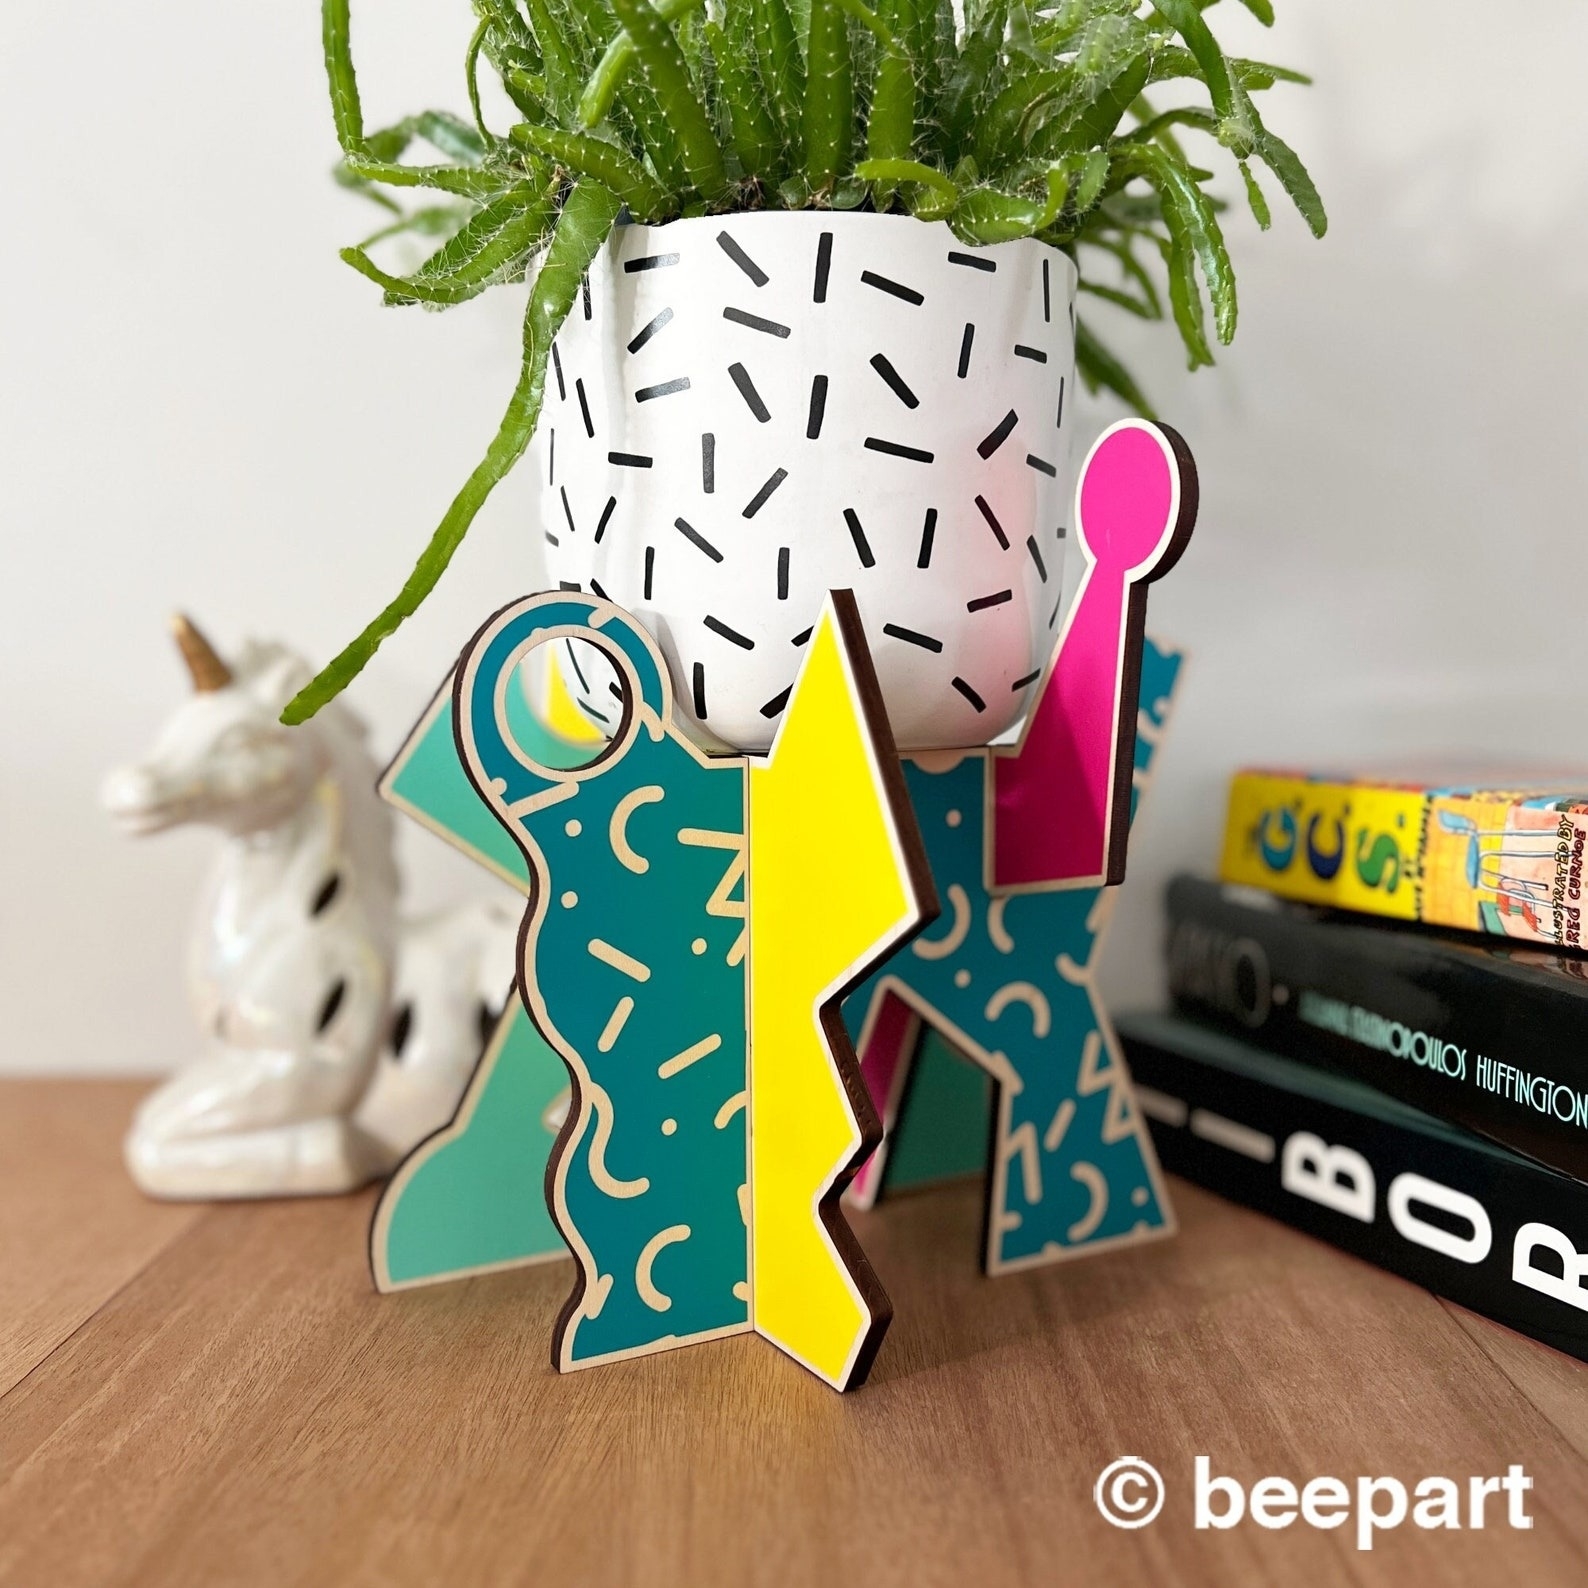 Decorative plant stand with abstract design holding a plant pot on a wooden surface